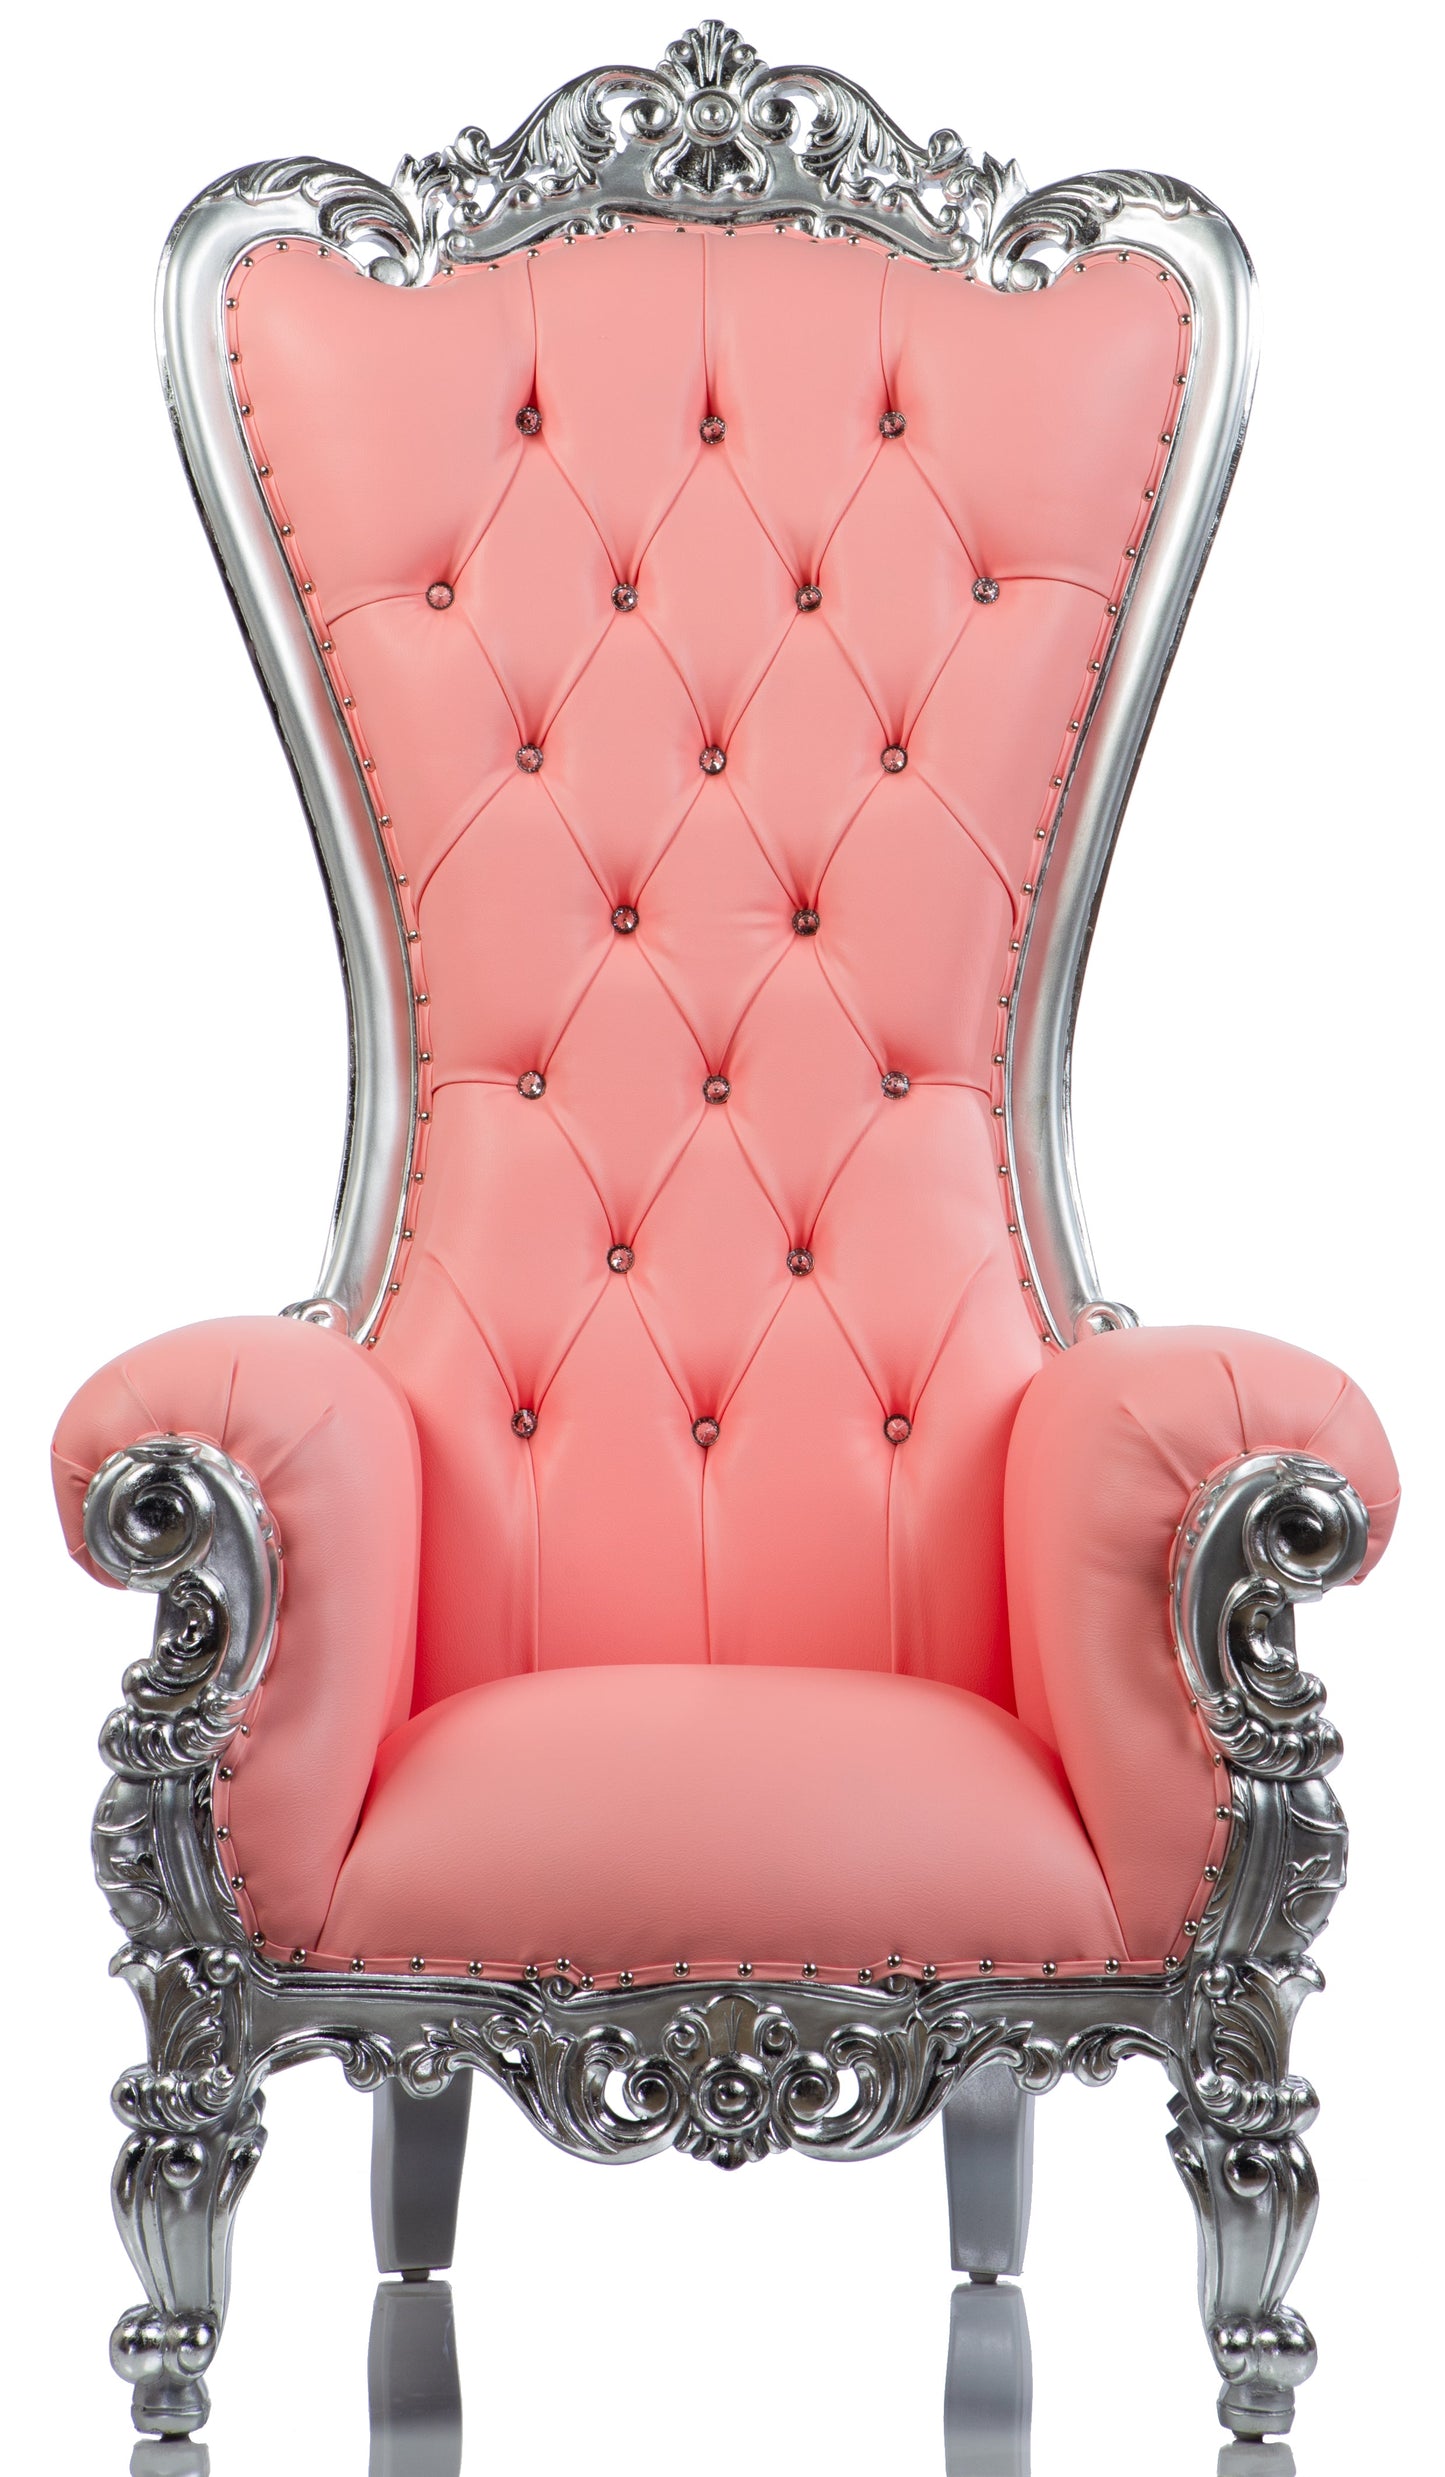 Cotton Candy Shellback Throne (Pink/Silver)